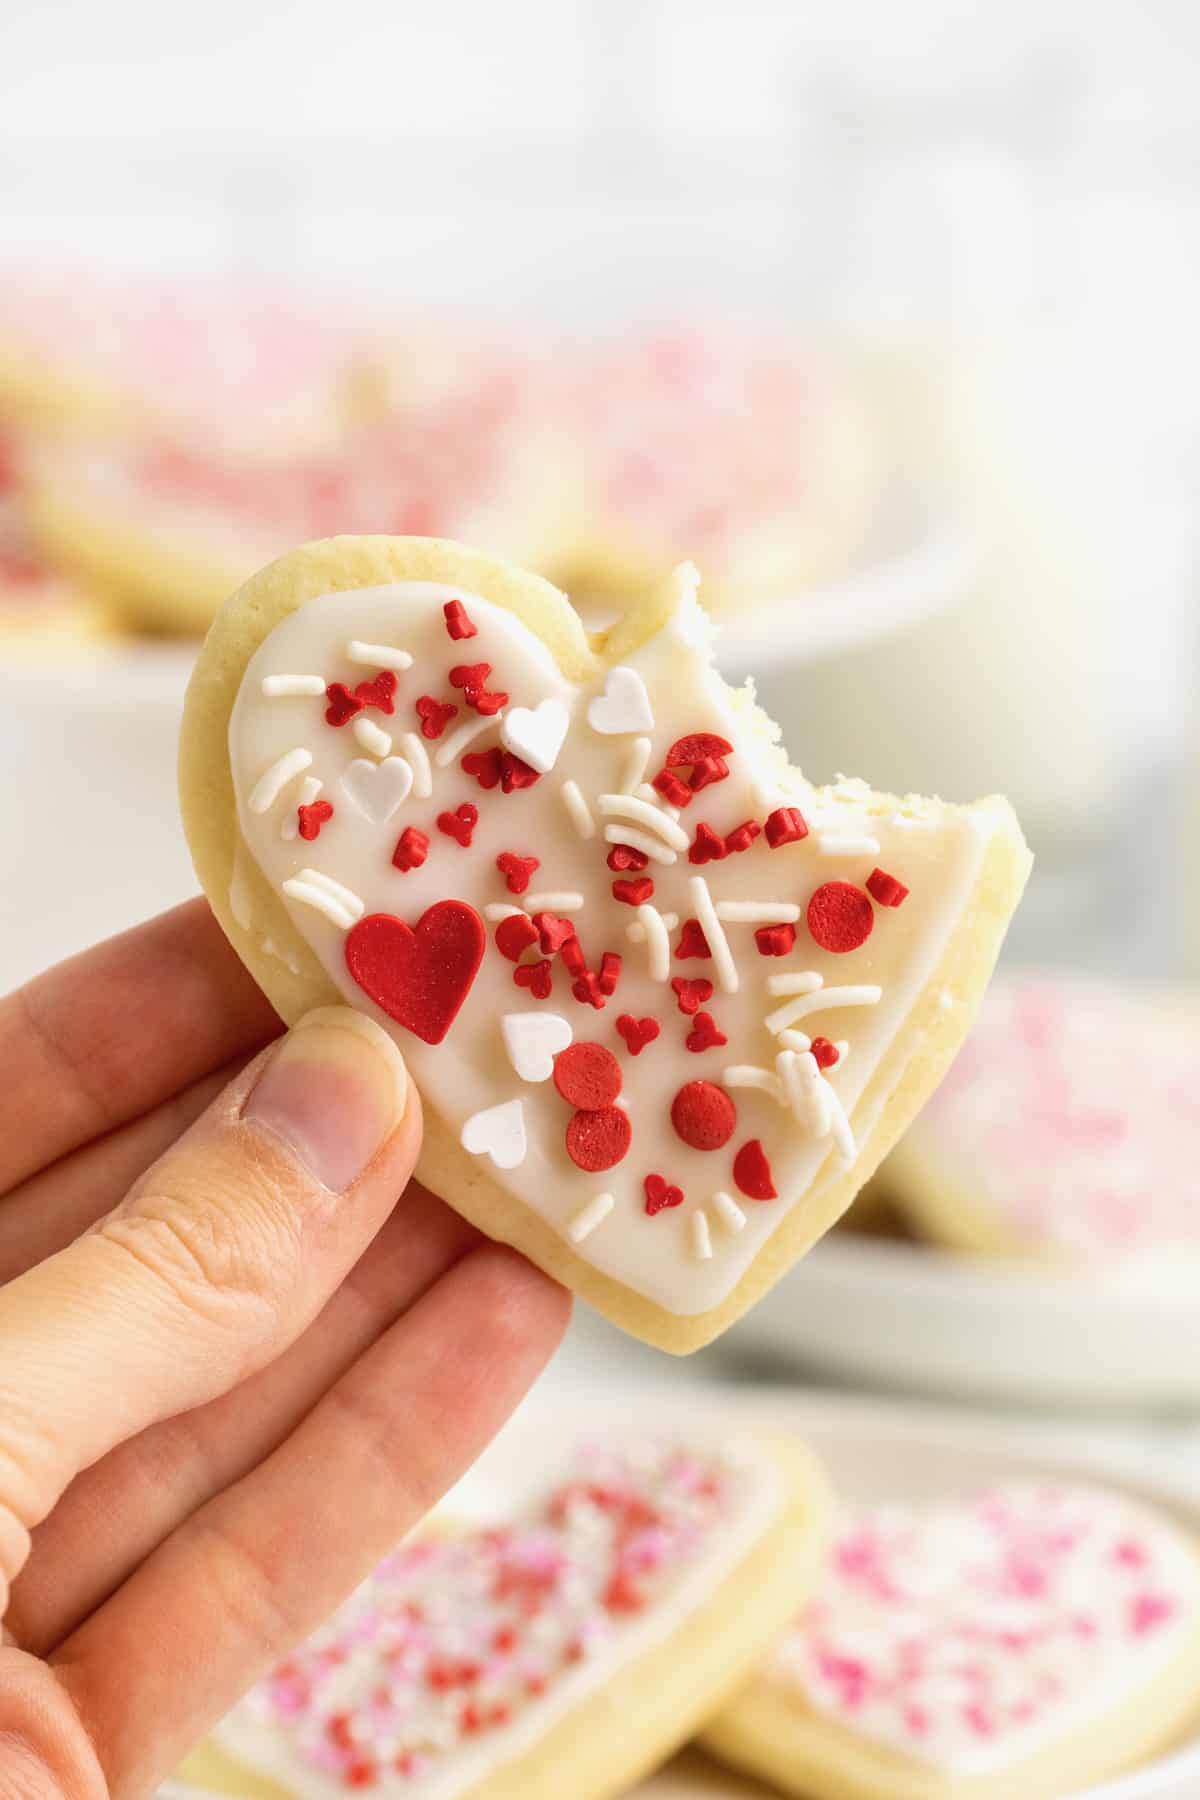 A hand holding a heart shaped sugar cookie with red and white sprinkles with a bite out of the top right corner.